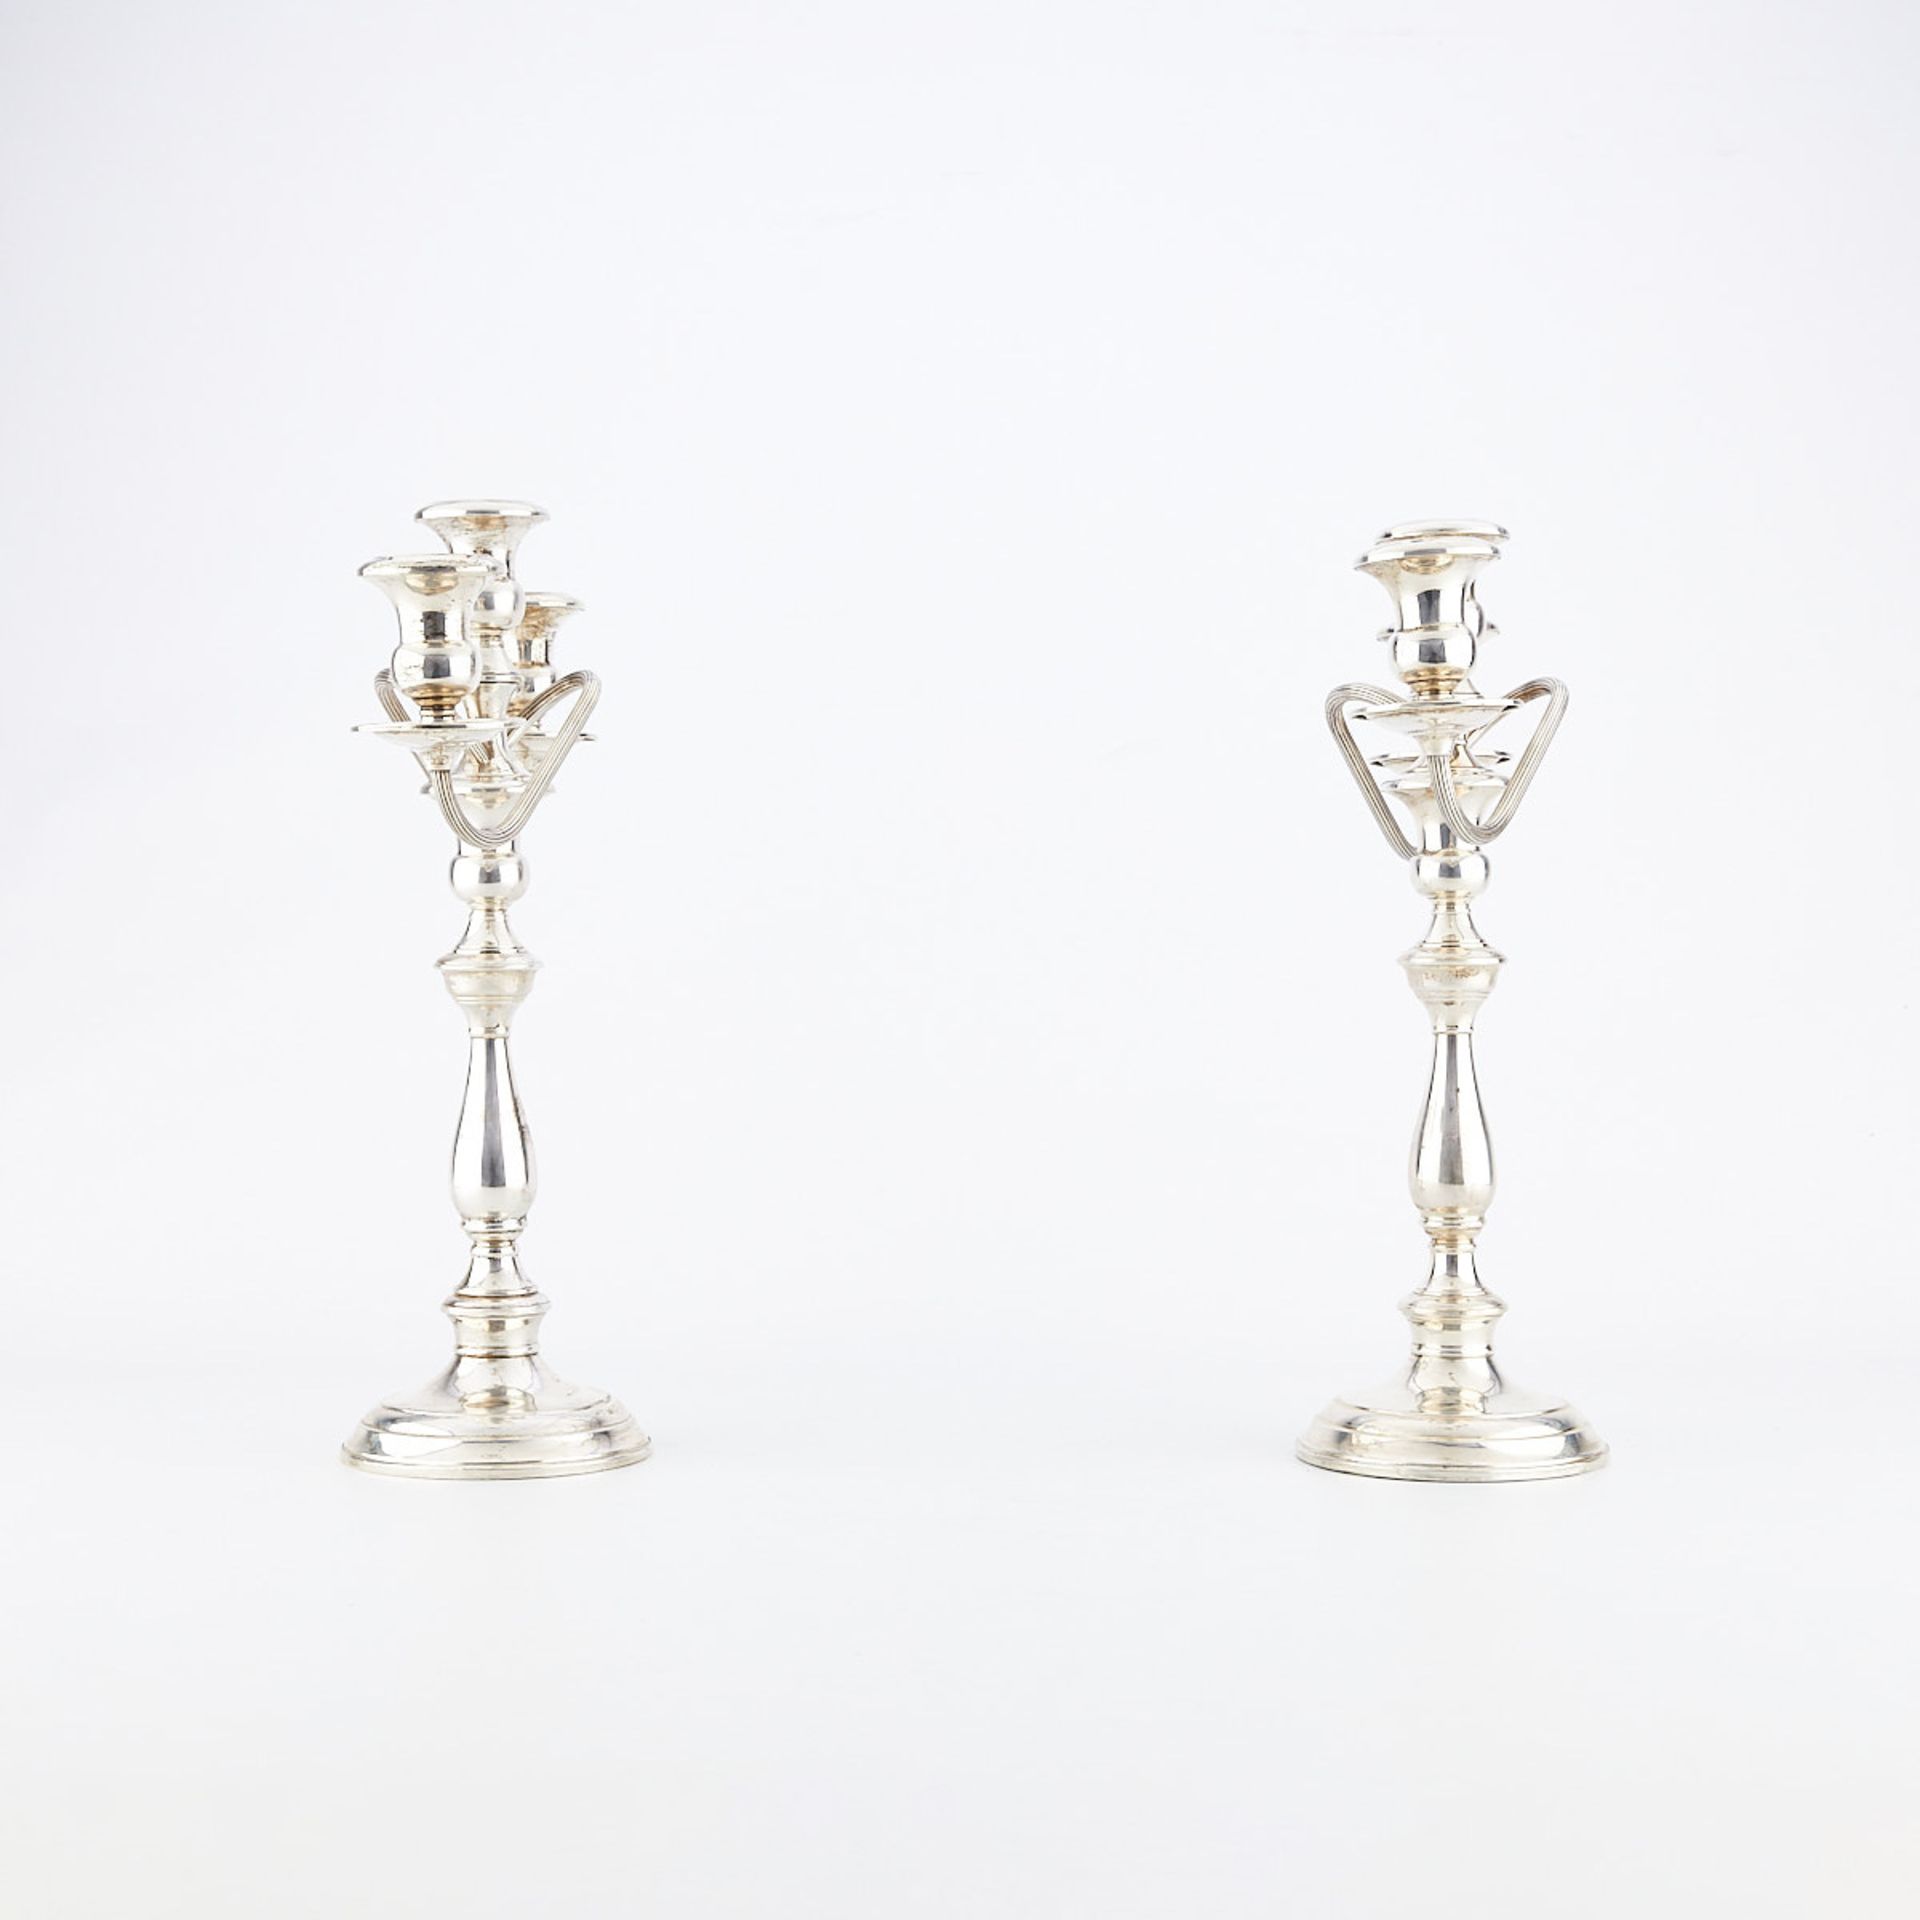 Pair of Whiting Sterling Silver Candelabra - Image 3 of 11